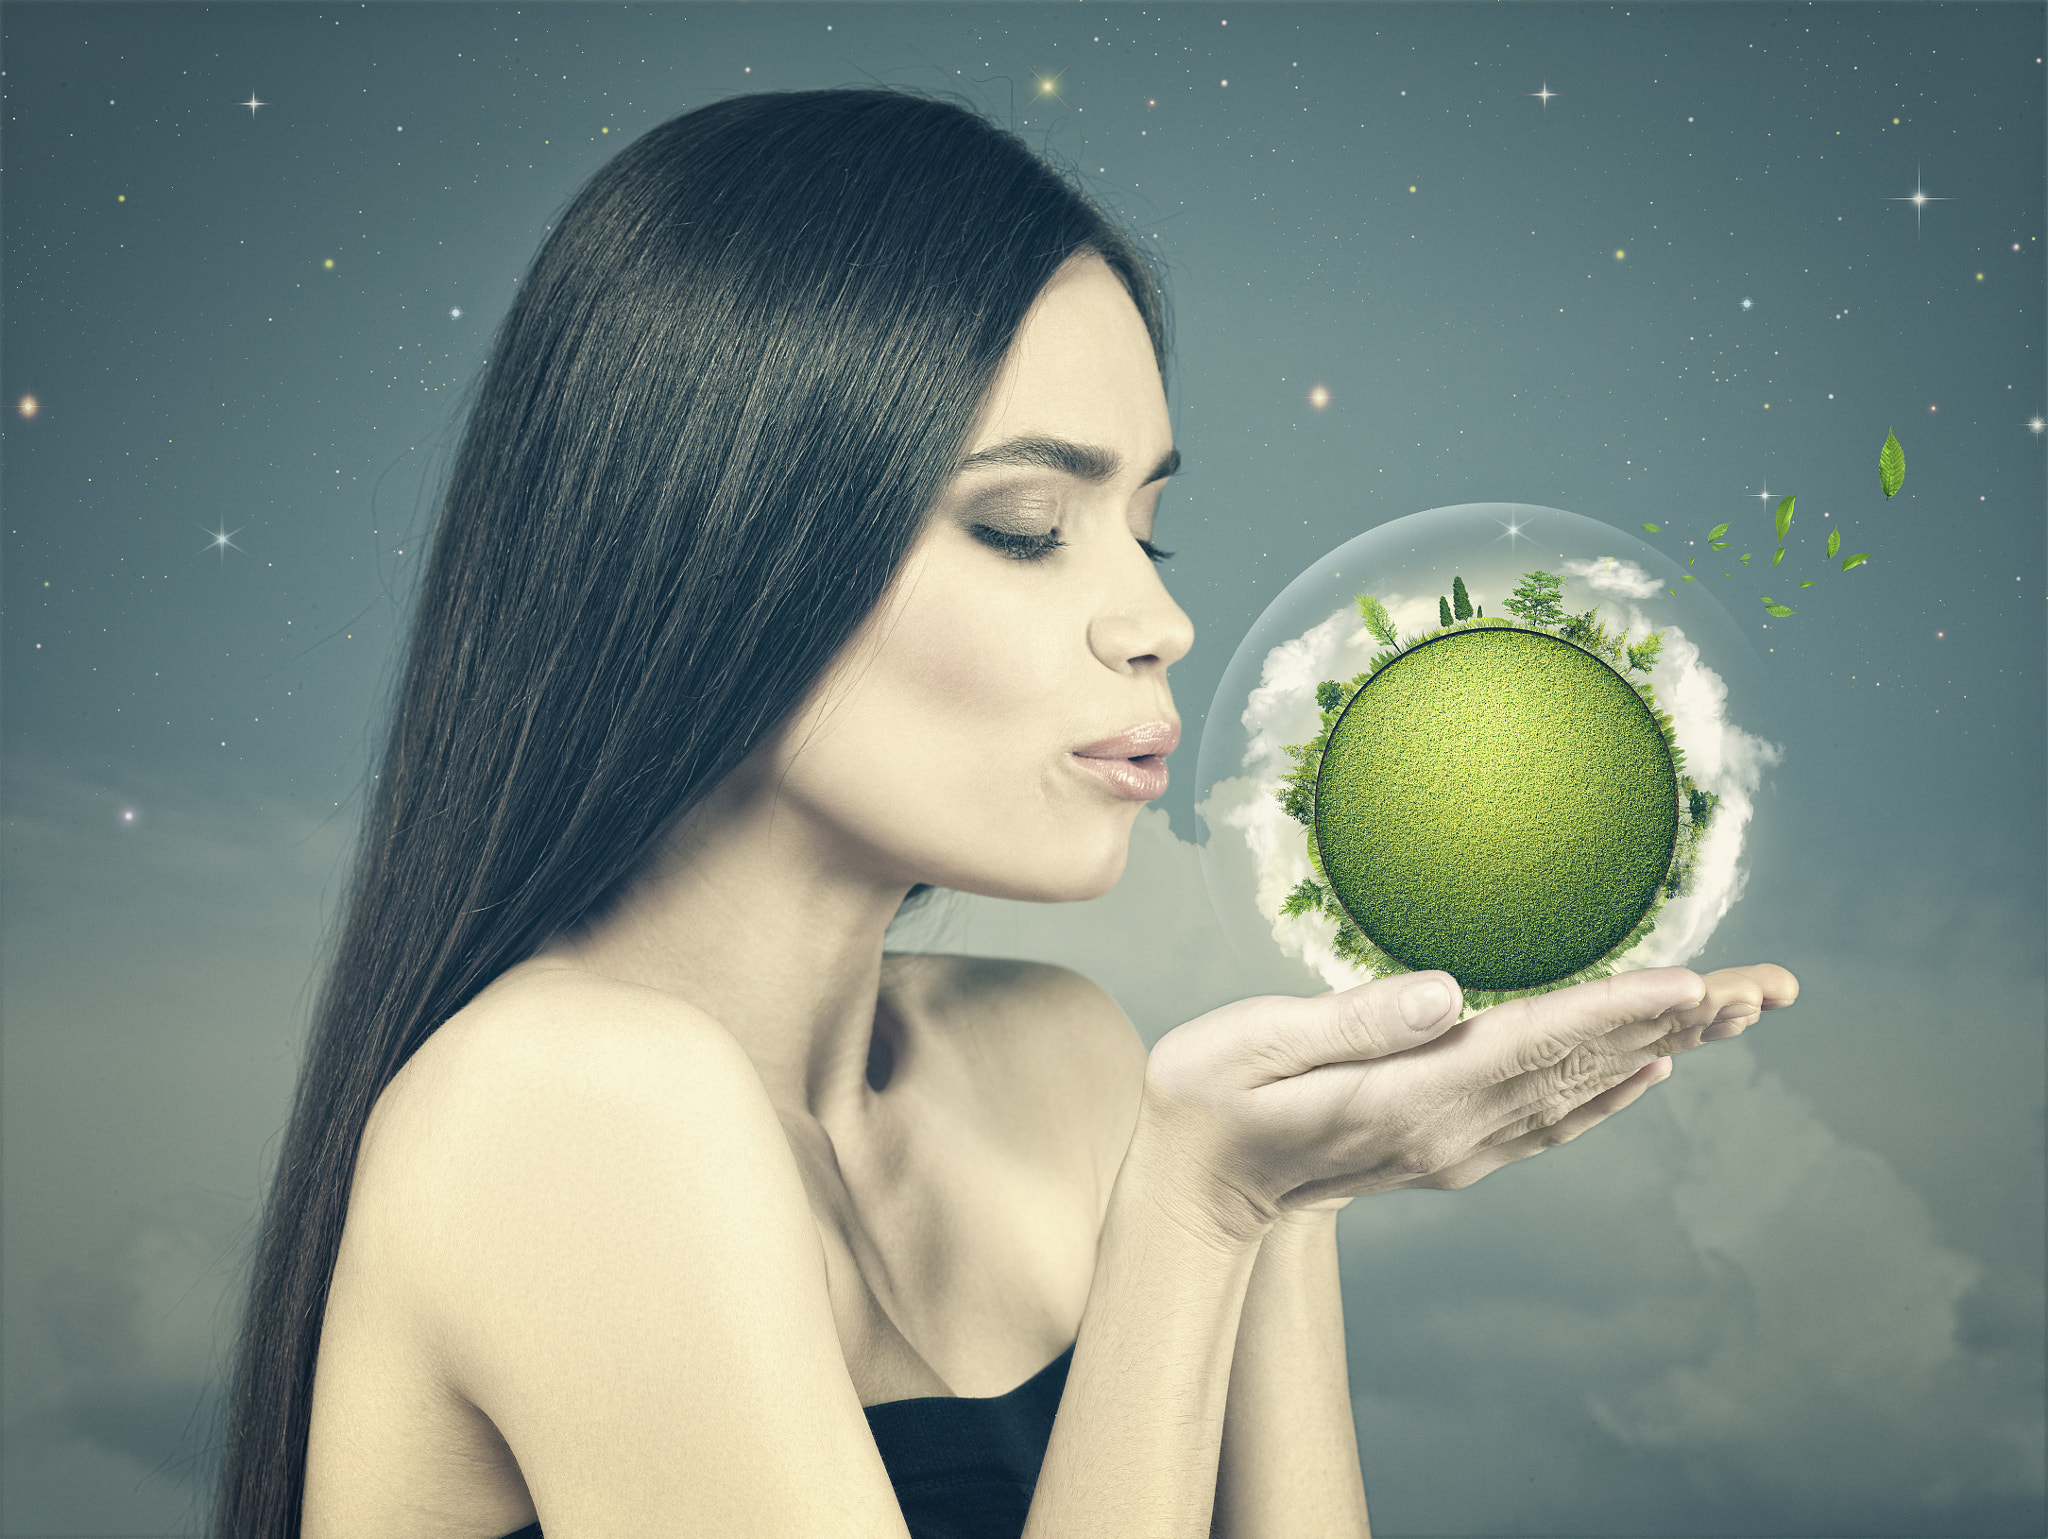 Eco female portrait with beauty white girl holding green planet